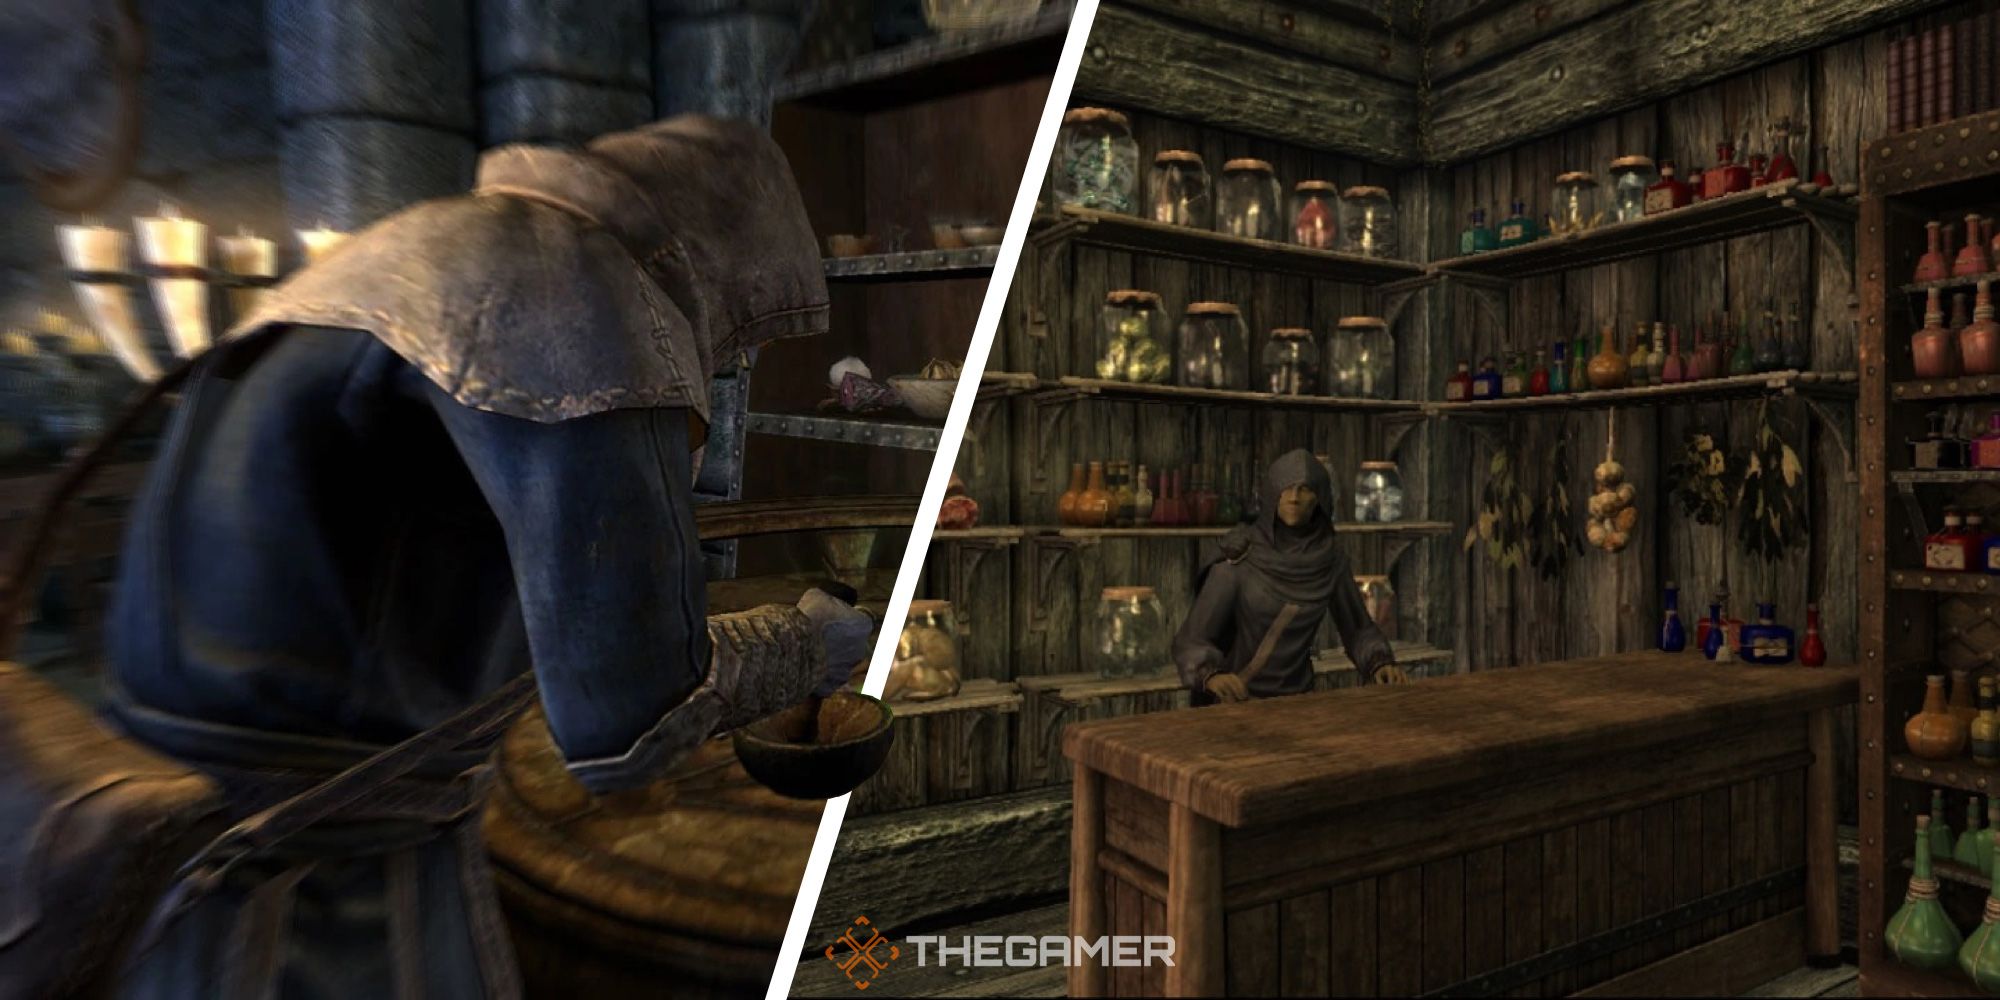 Skyrim: A split image of the player crafting an alchemy item on the left and an alchemist merchant on the right